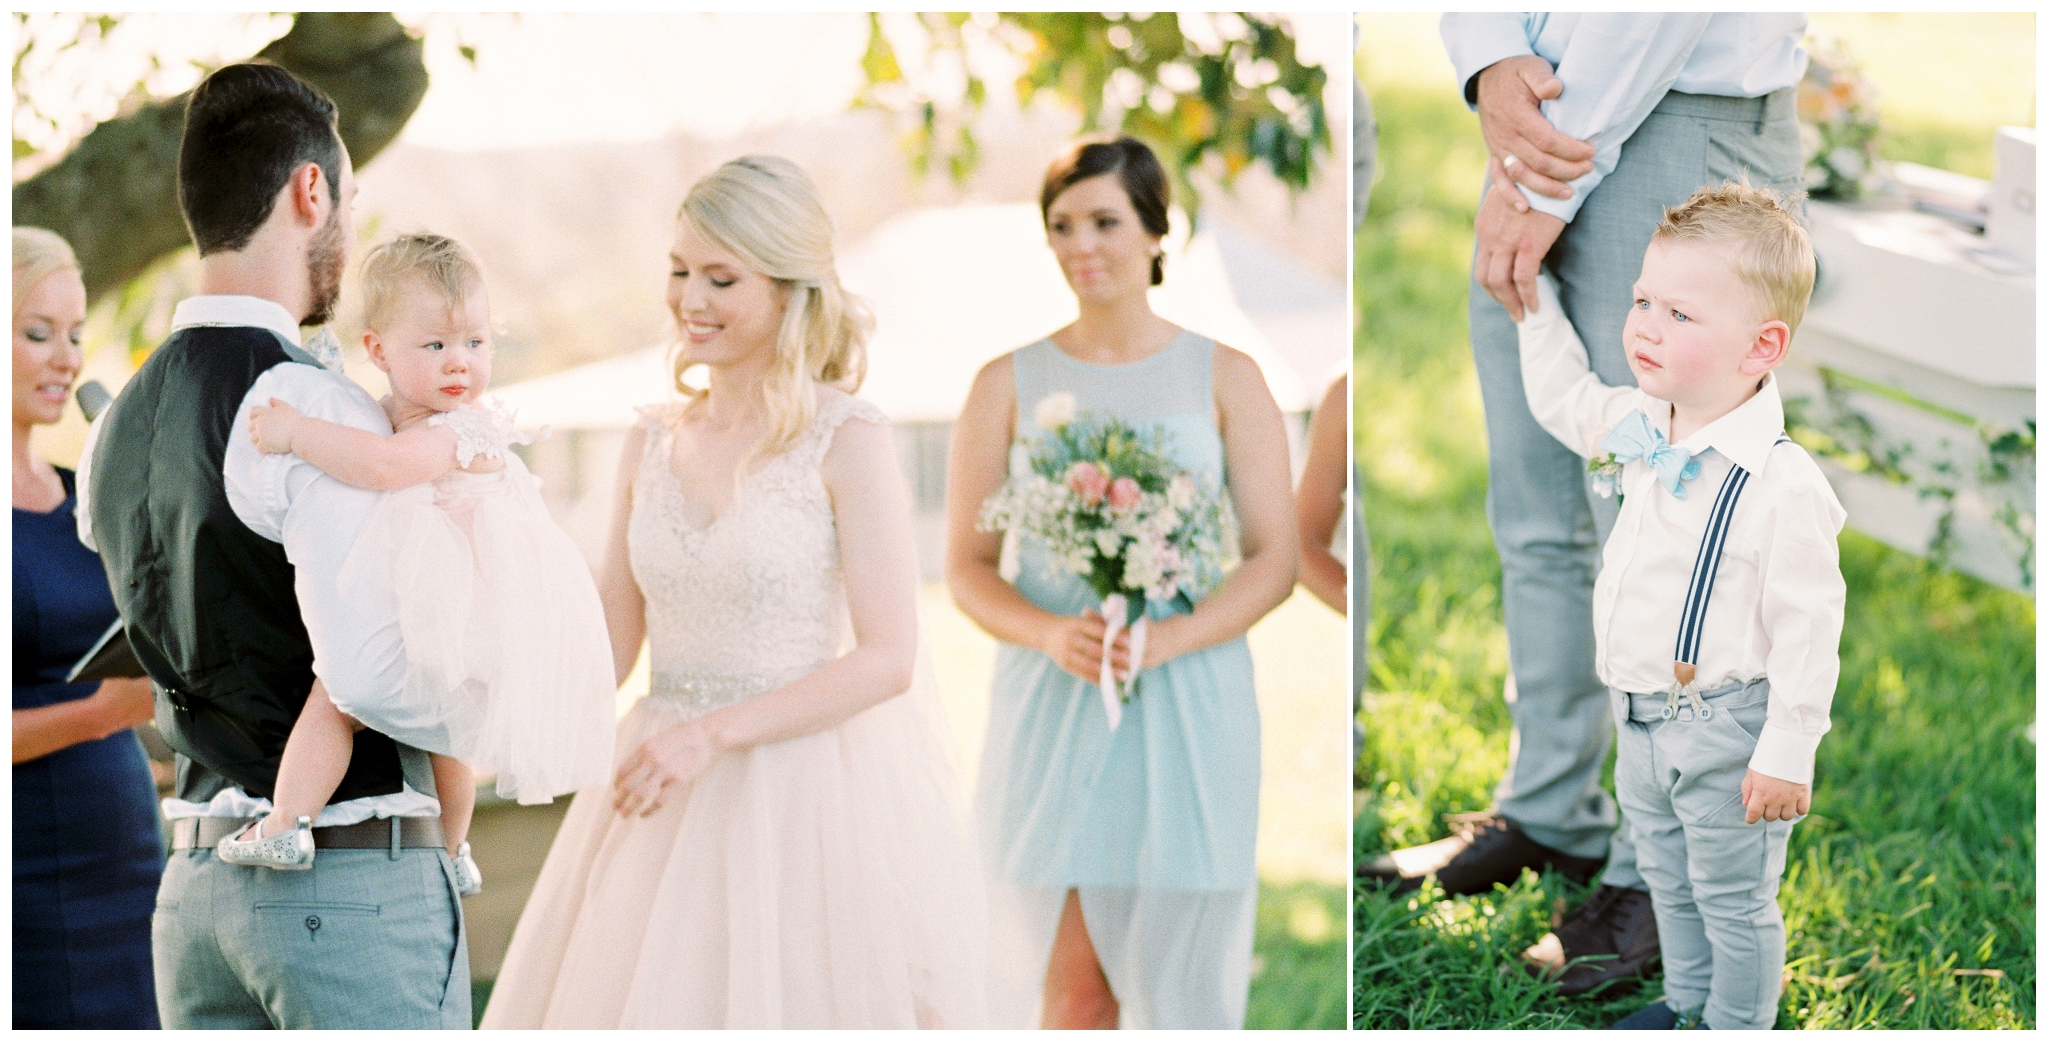 Tegan and Alex Wedding at Albert River Wines by Casey Jane Photography 37